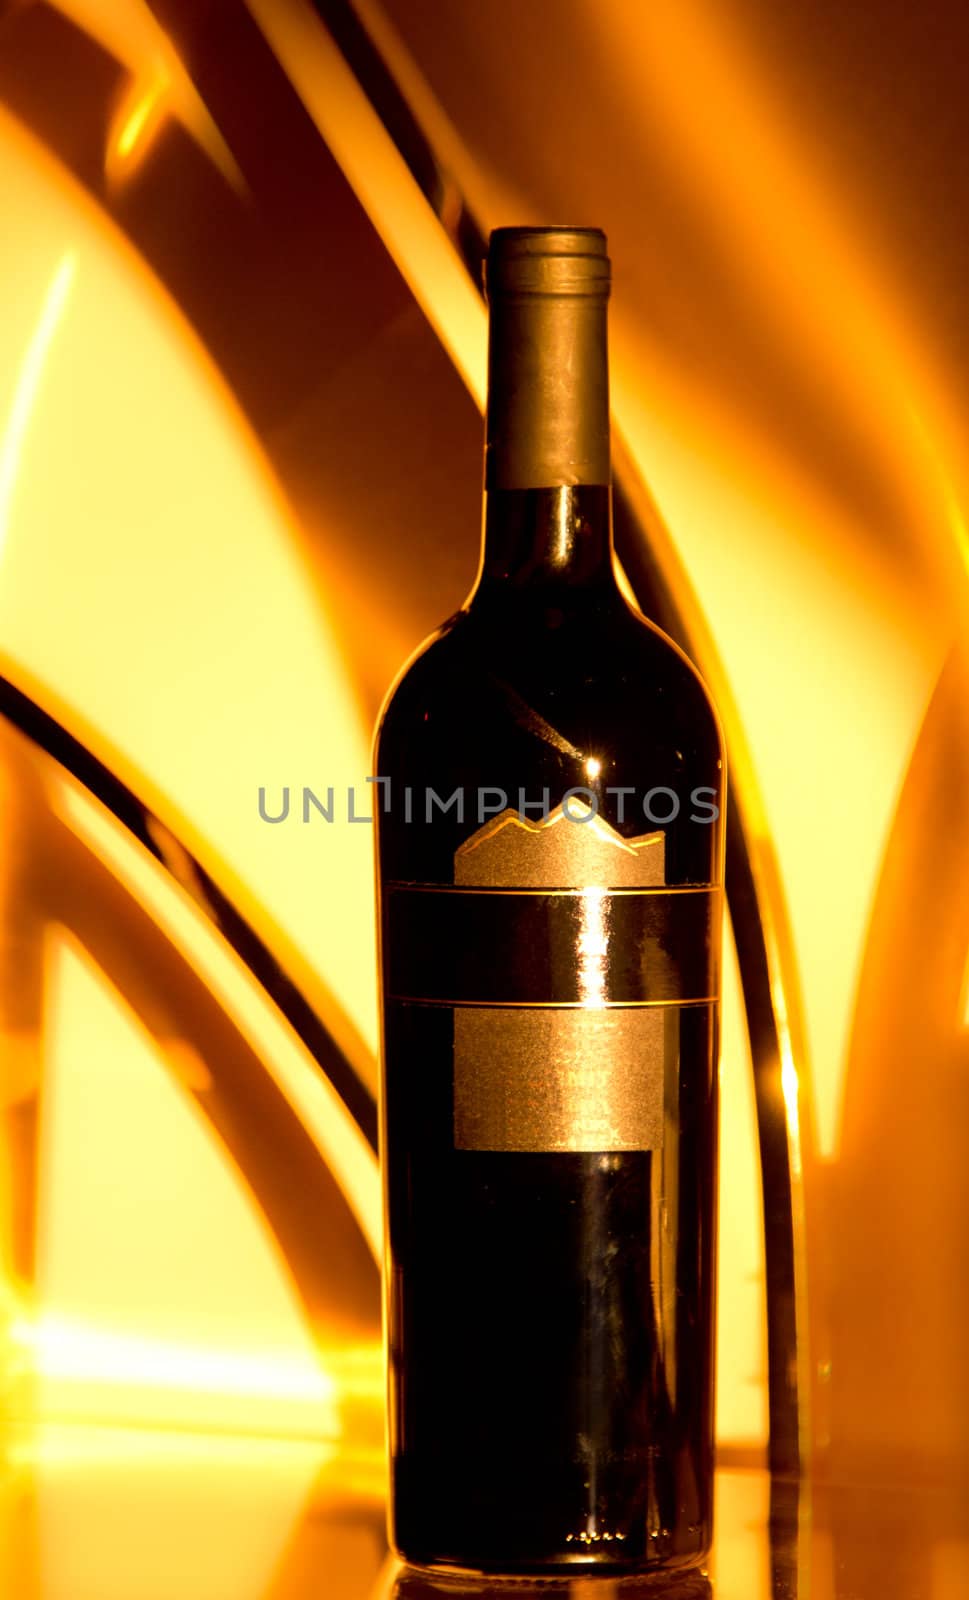 A wine bottle with a dreamy golden background lit by the rising morning sun